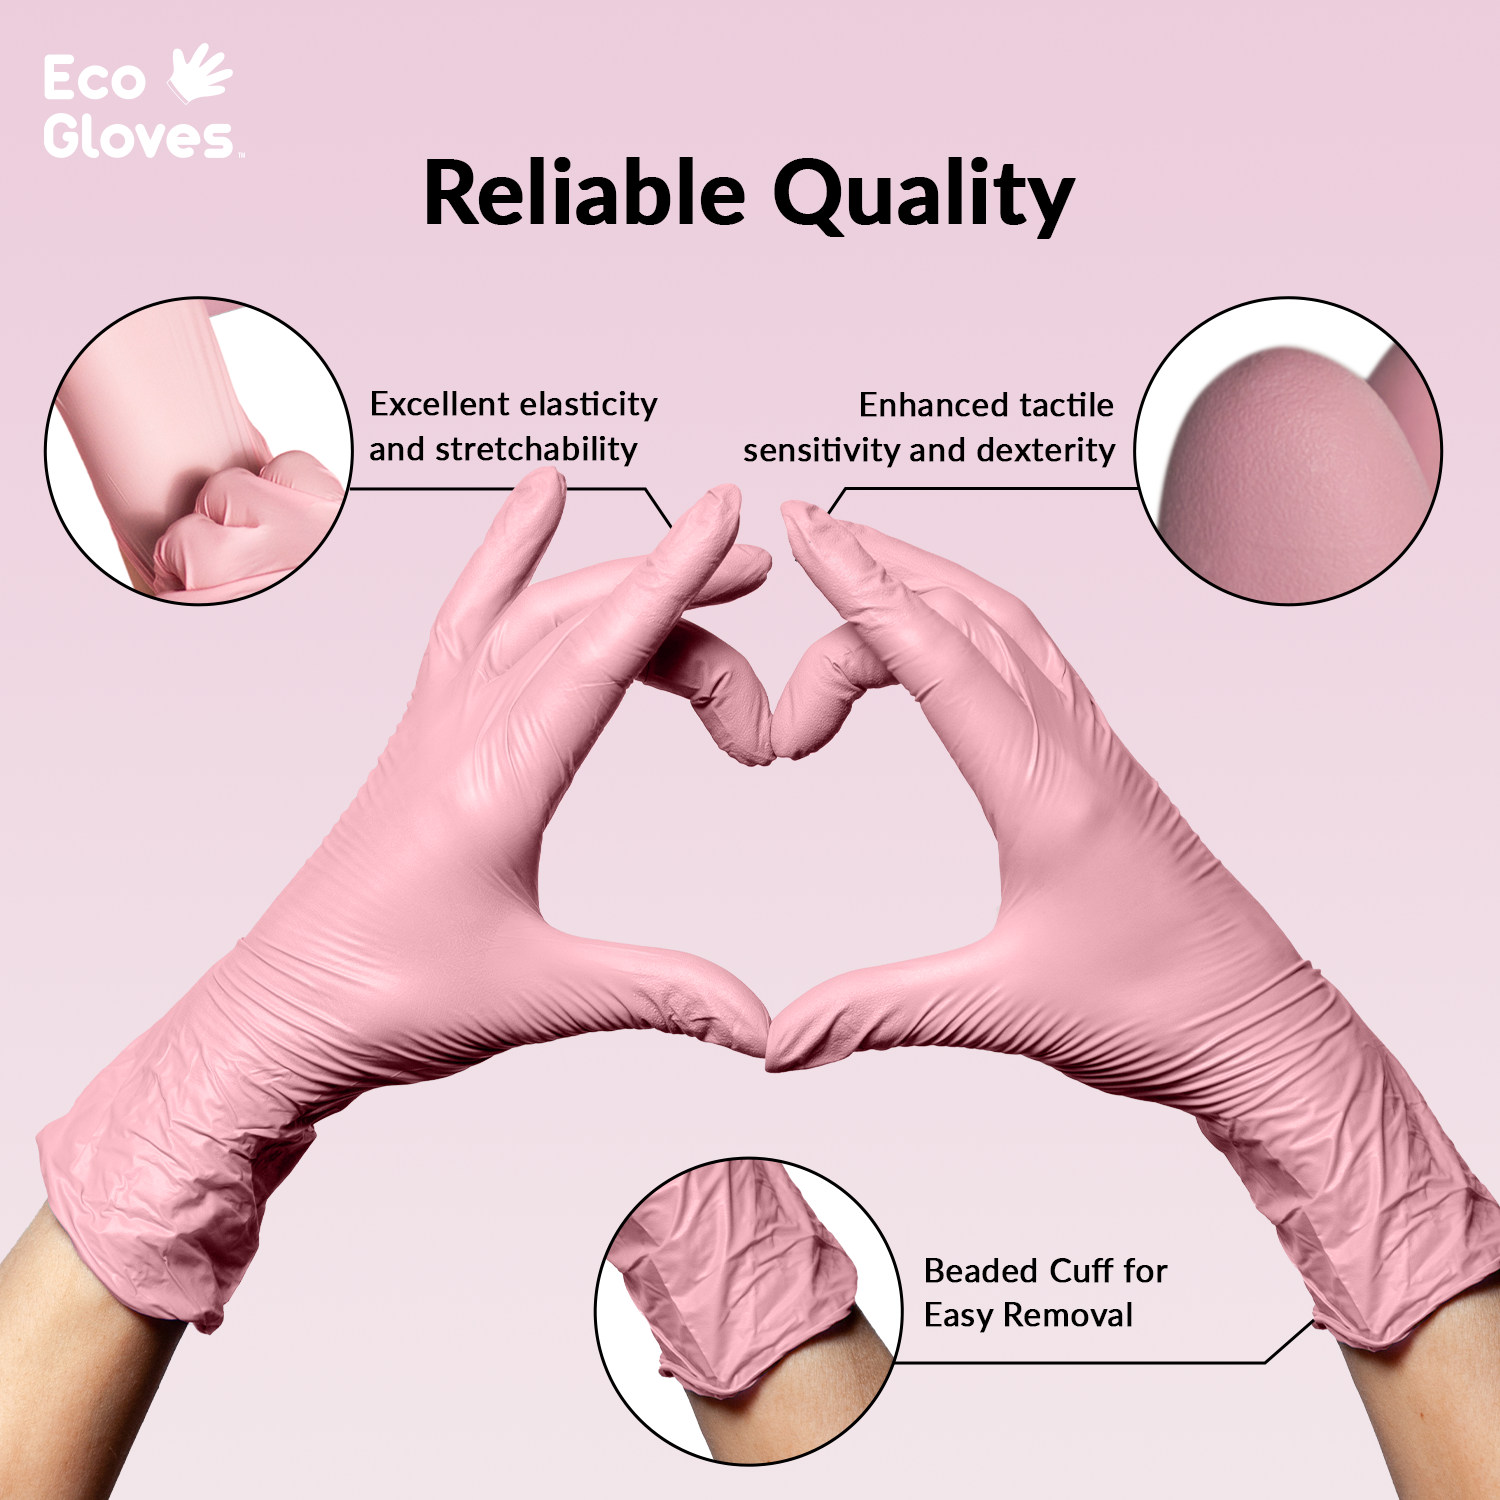 Kingfa Pink Nitrile Disposable Gloves (3.5 mil) 100 Gloves/Box - 100% Recyclable